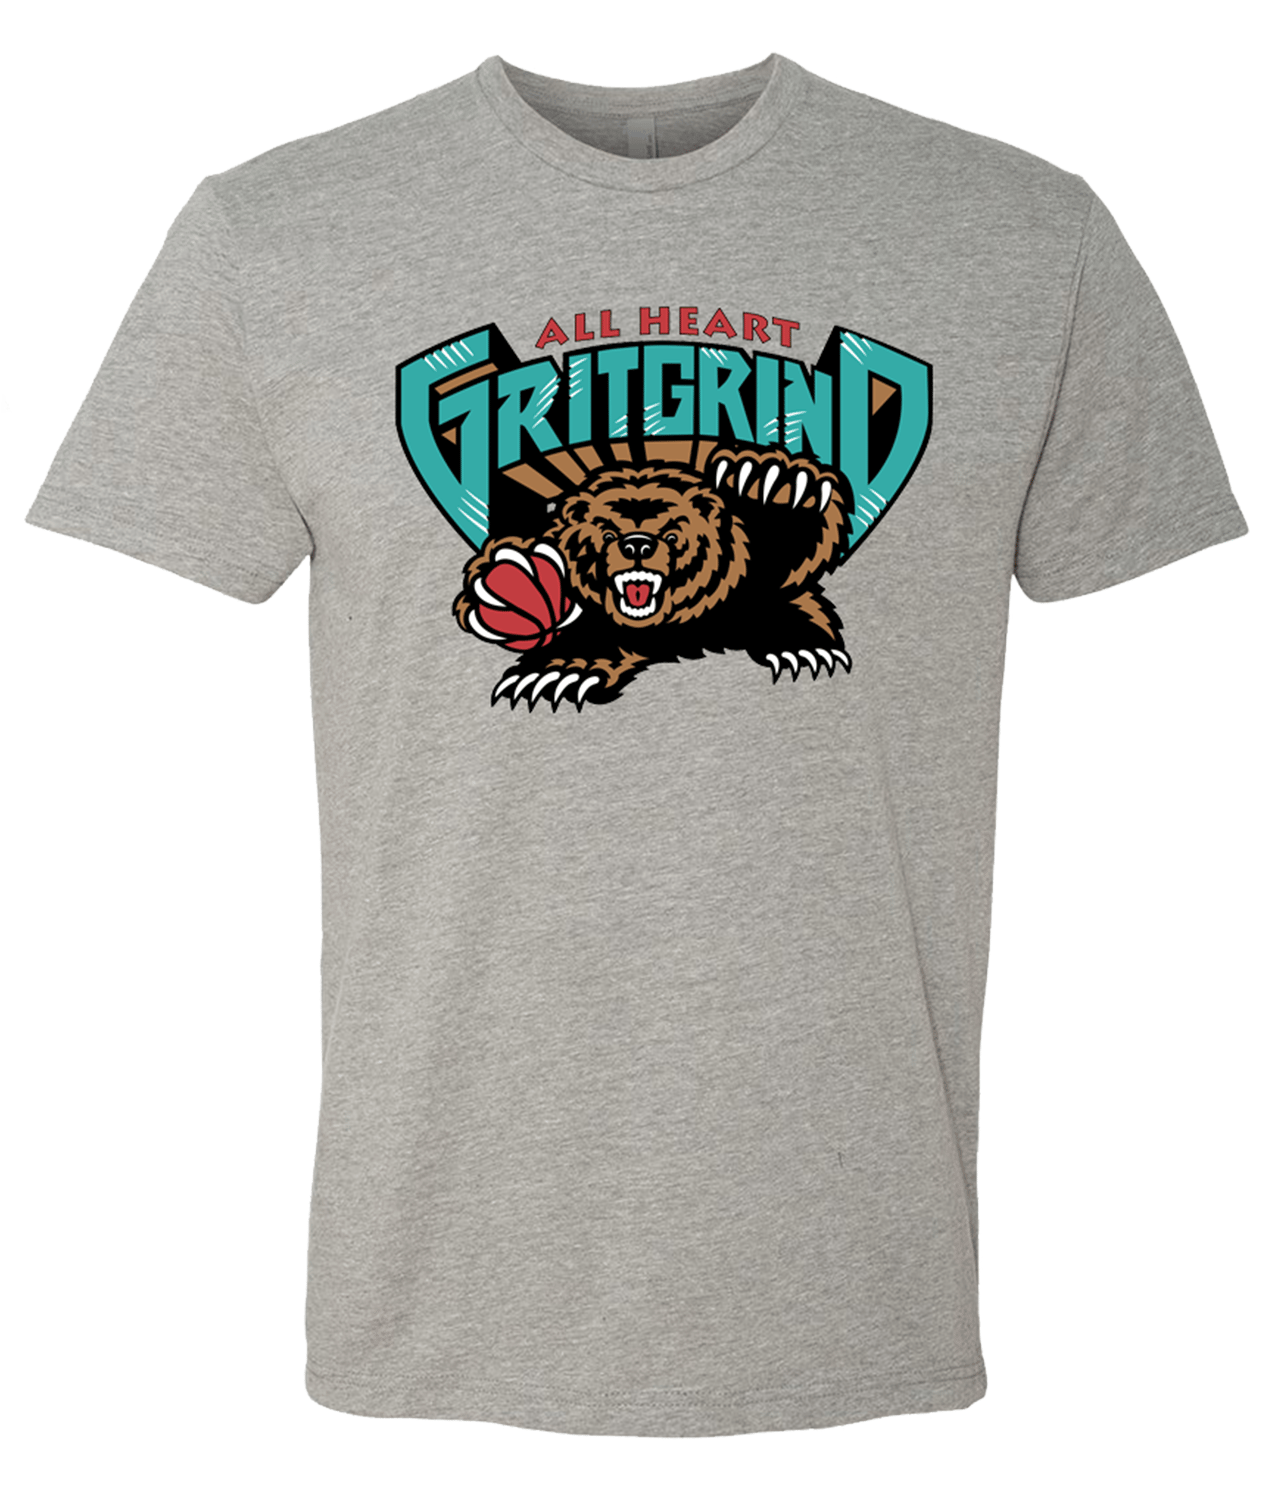 grit and grind memphis shirt